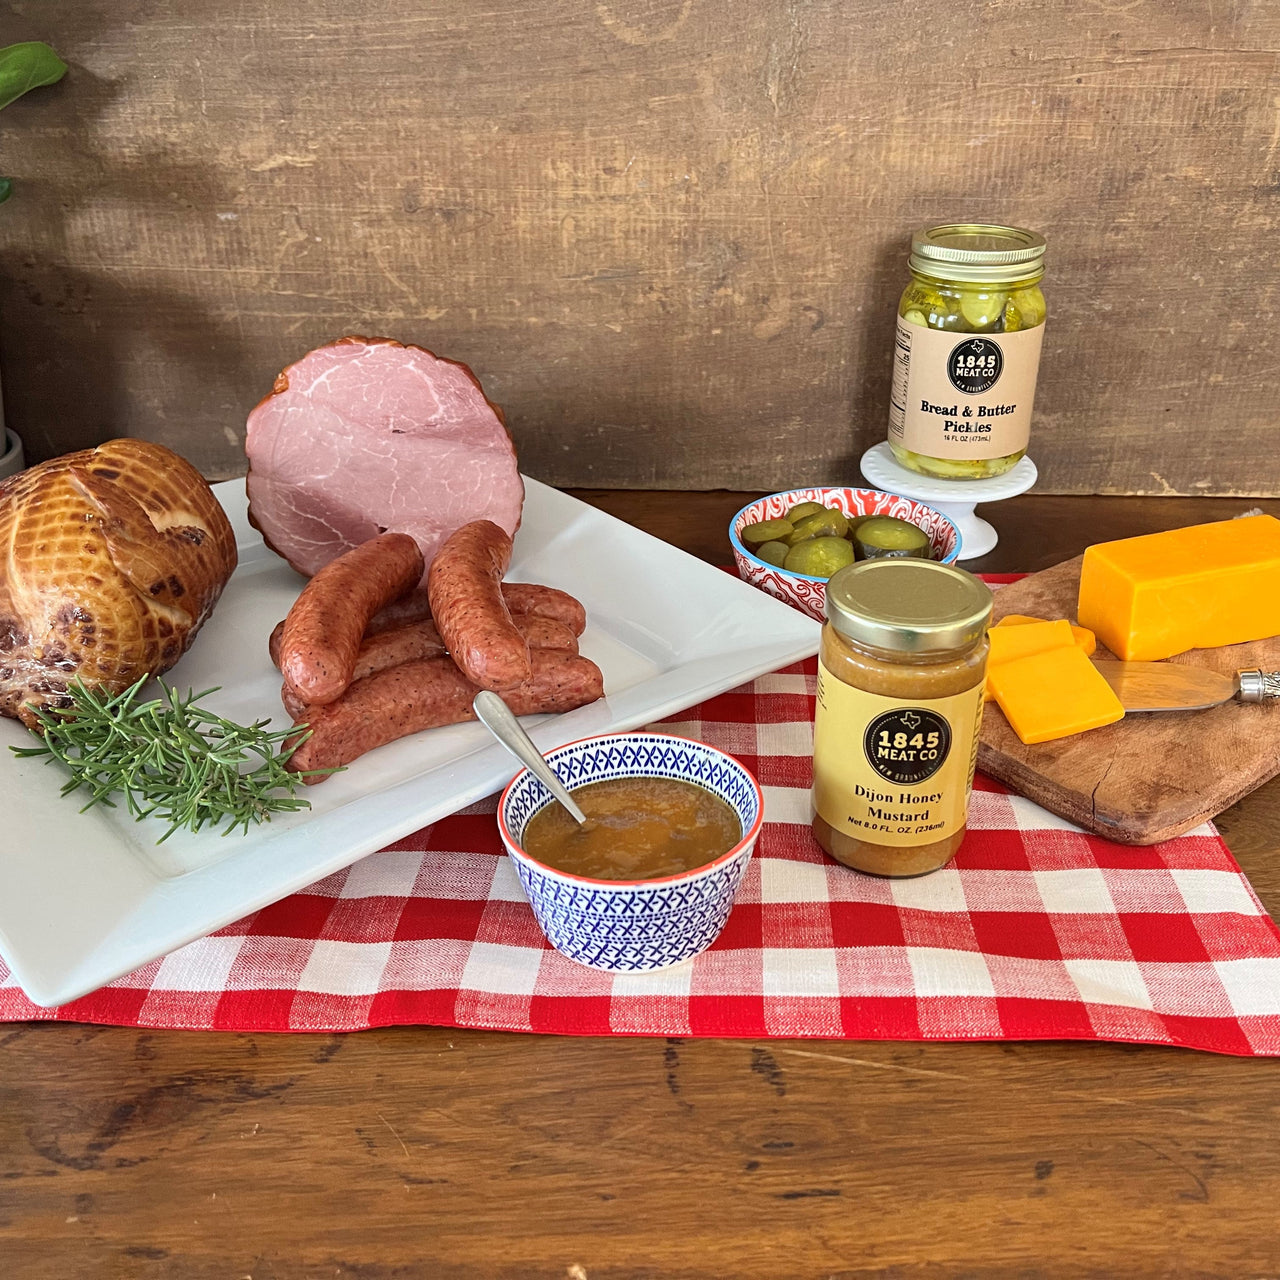 Some of our best.  Includes:  1 lb. of Pork & Beef Sausage 8 oz. Smoked Cheddar Cheese 2 1/2 lb. Smoked Chicken 2 - 3 lb. Smoked Boneless Ham 16 oz. Jar of Bread & Butter Pickles 8 oz. Jar of Honey Dijon Mustard Item #45